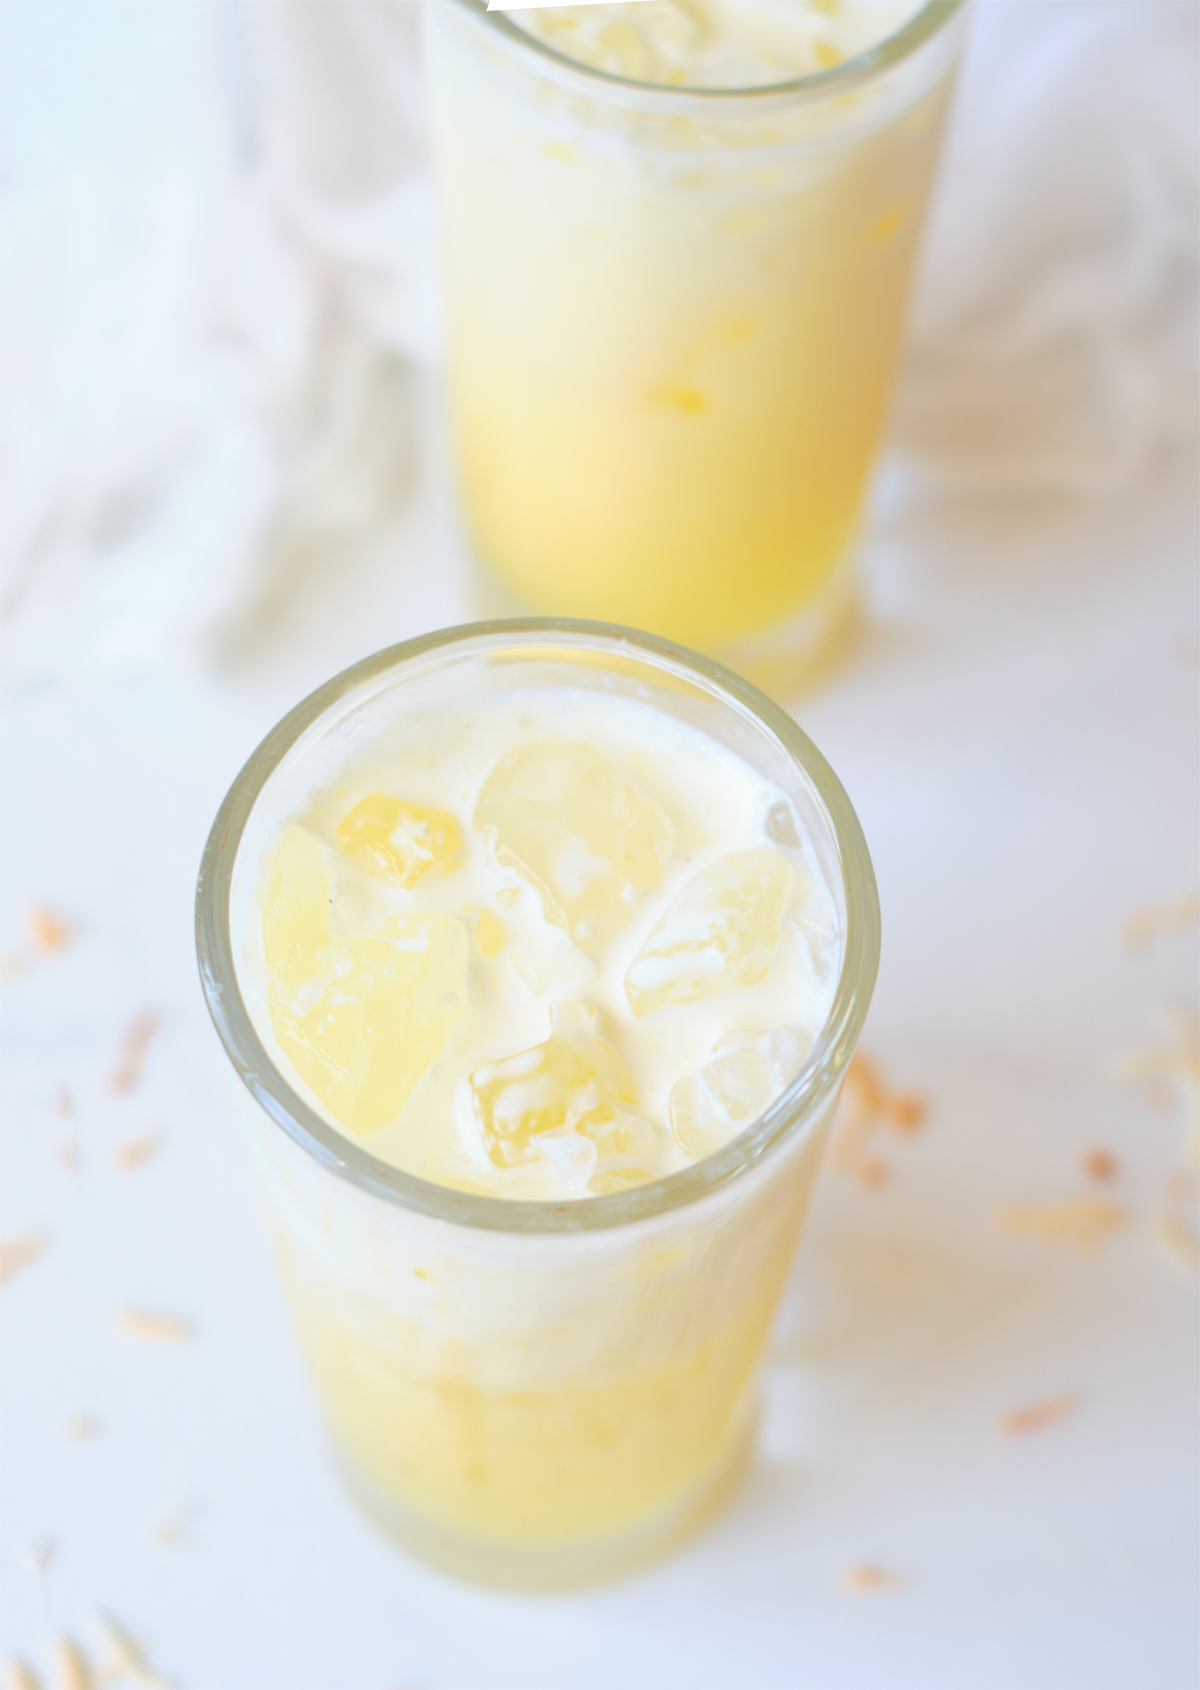 This Coconut Pineapple Italian soda recipe is perfect for any occasion or gathering. They are easy to make and can easily be customized.